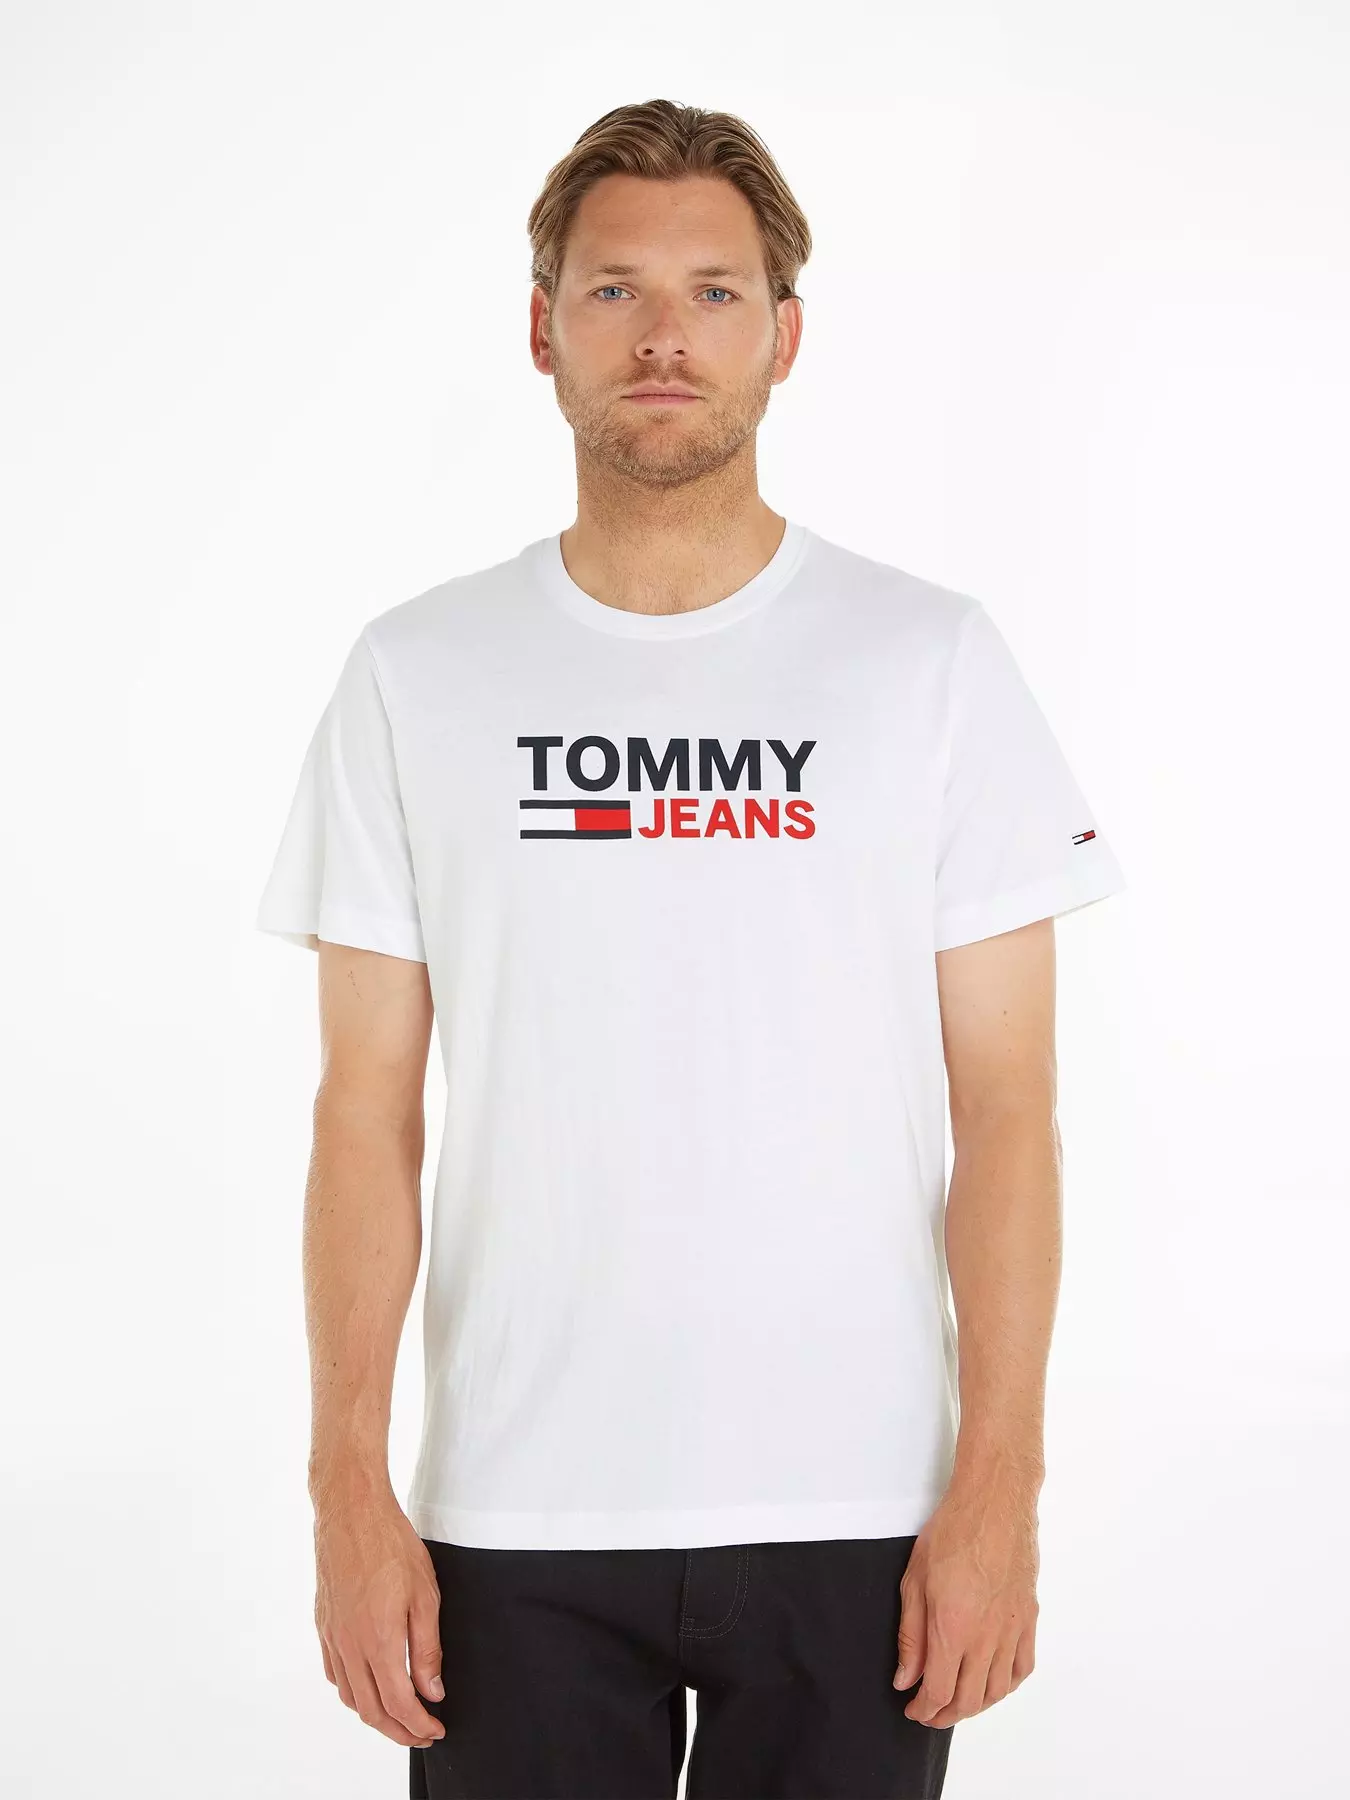 White | Tommy polos T-shirts | & | hilfiger Men Ireland Very 